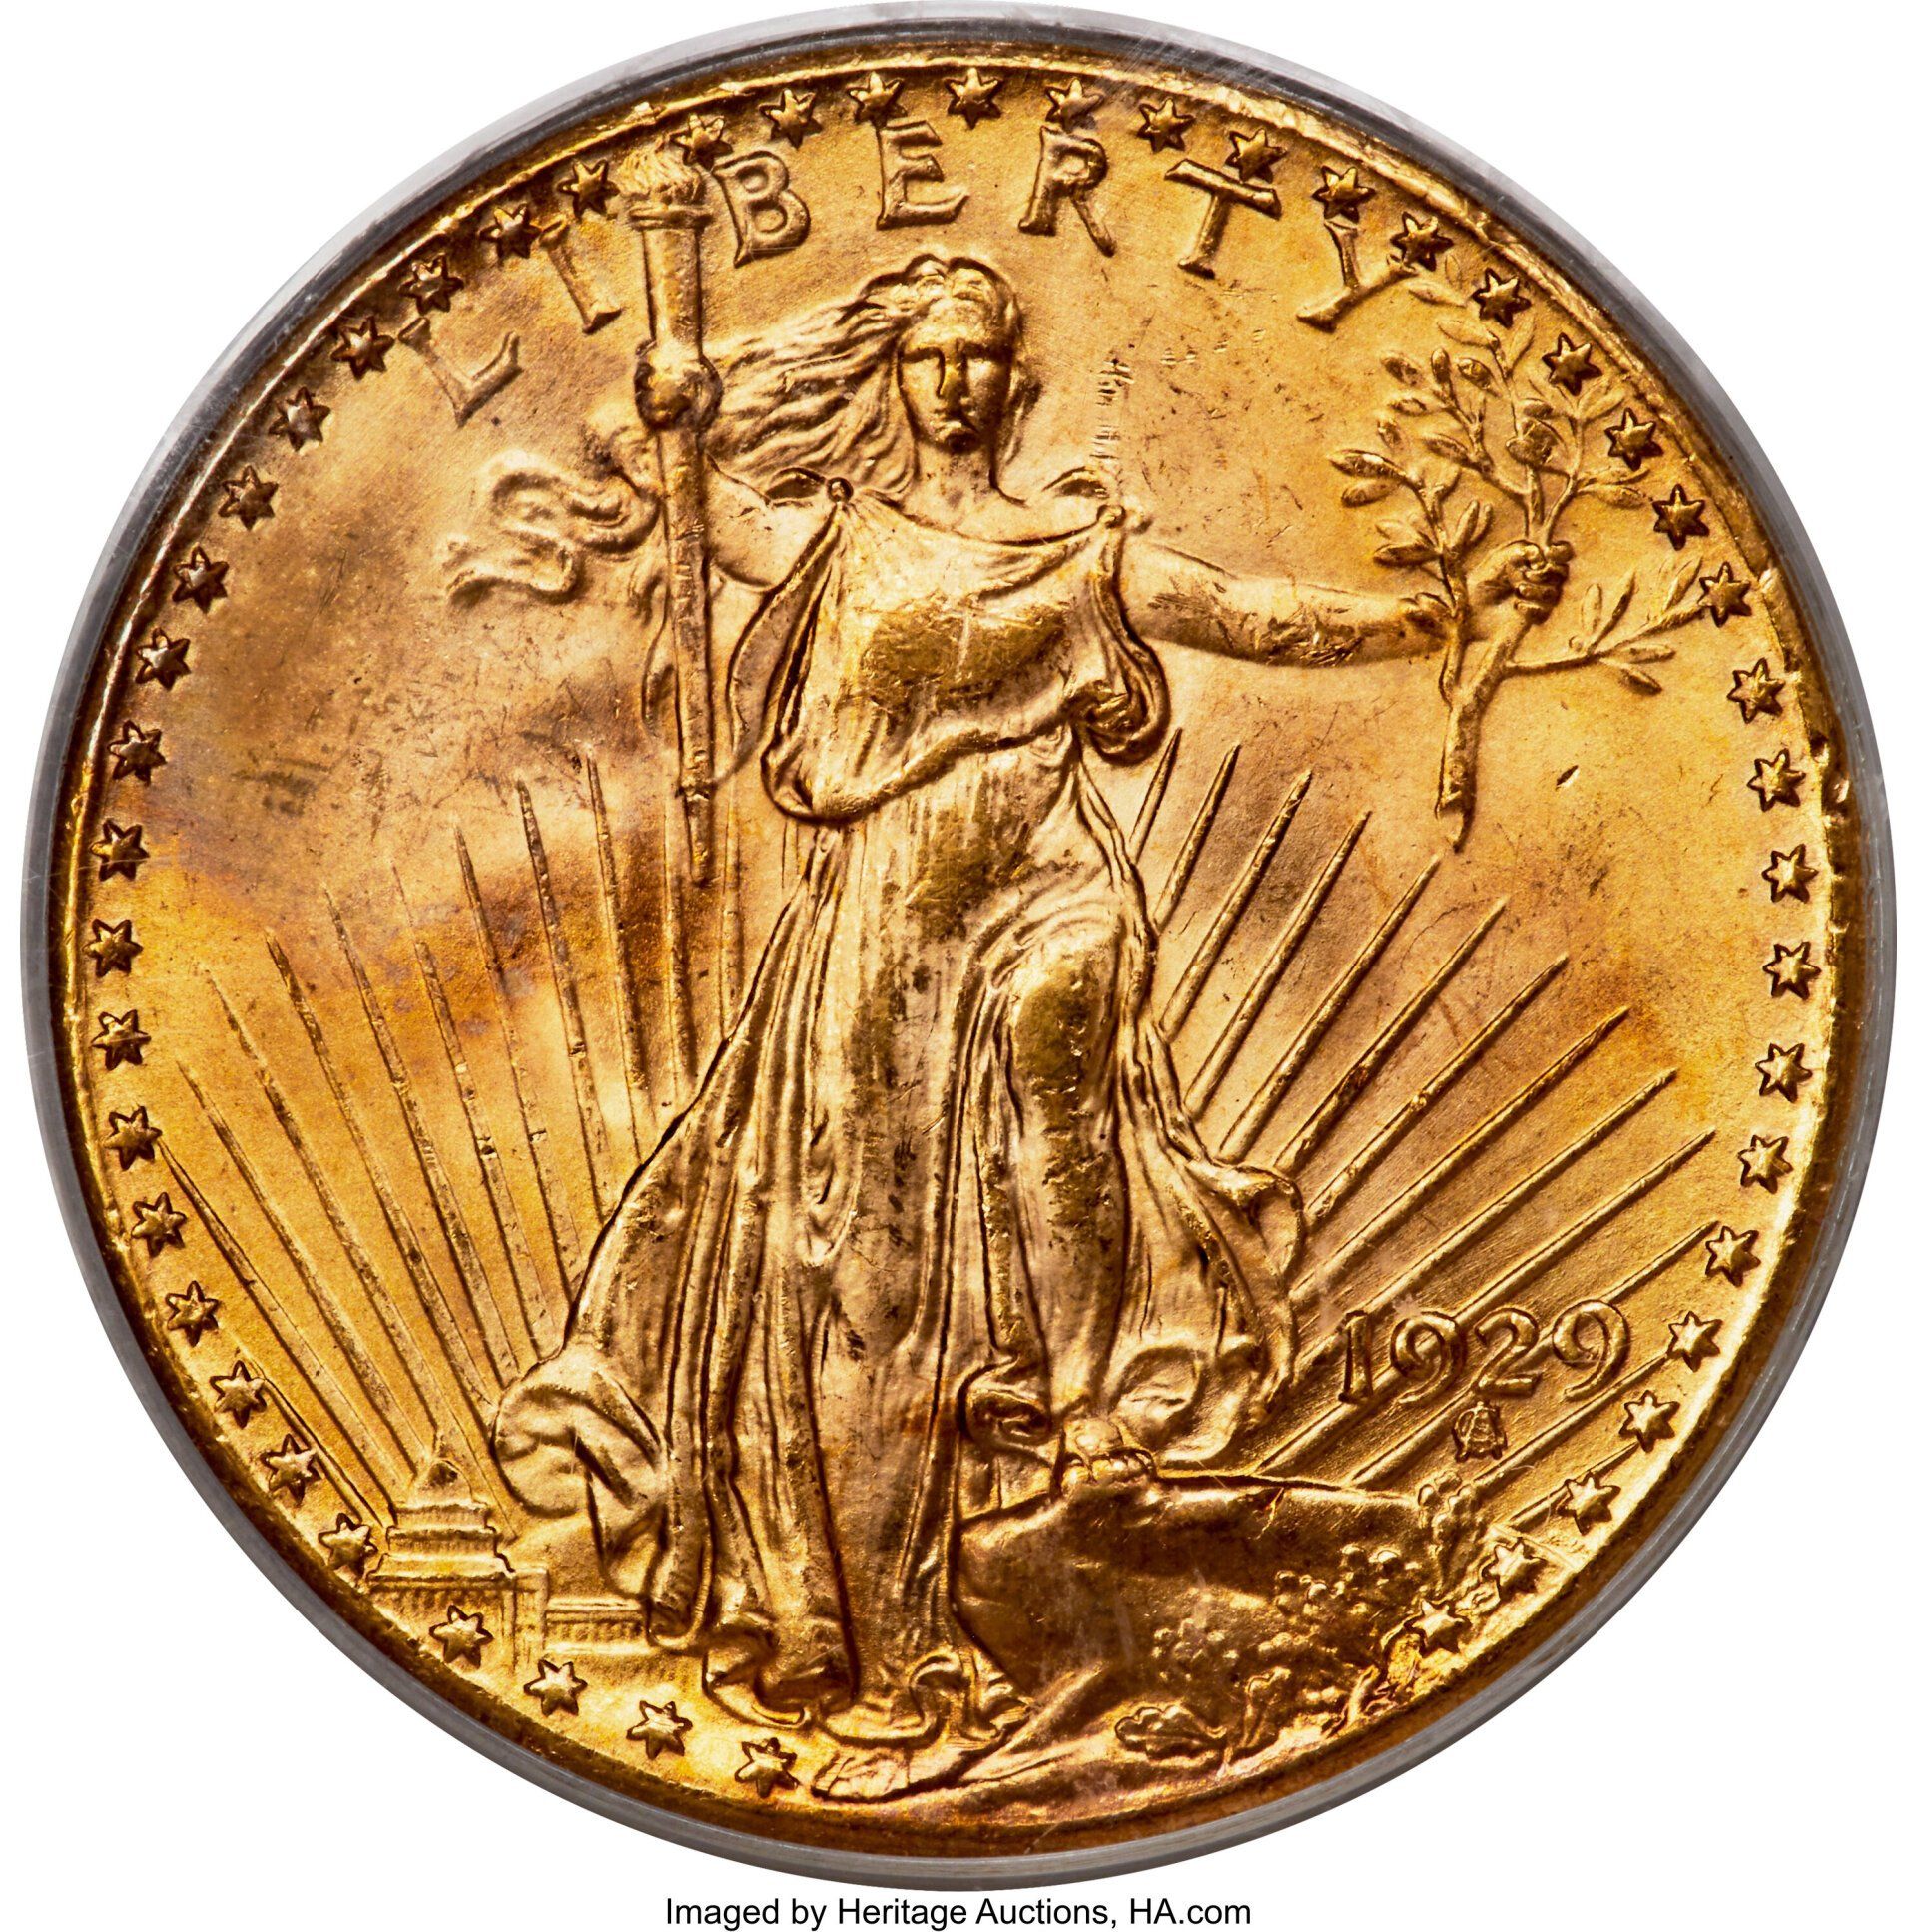 1929 double eagle offered by Heritage Auctions, HA.Com